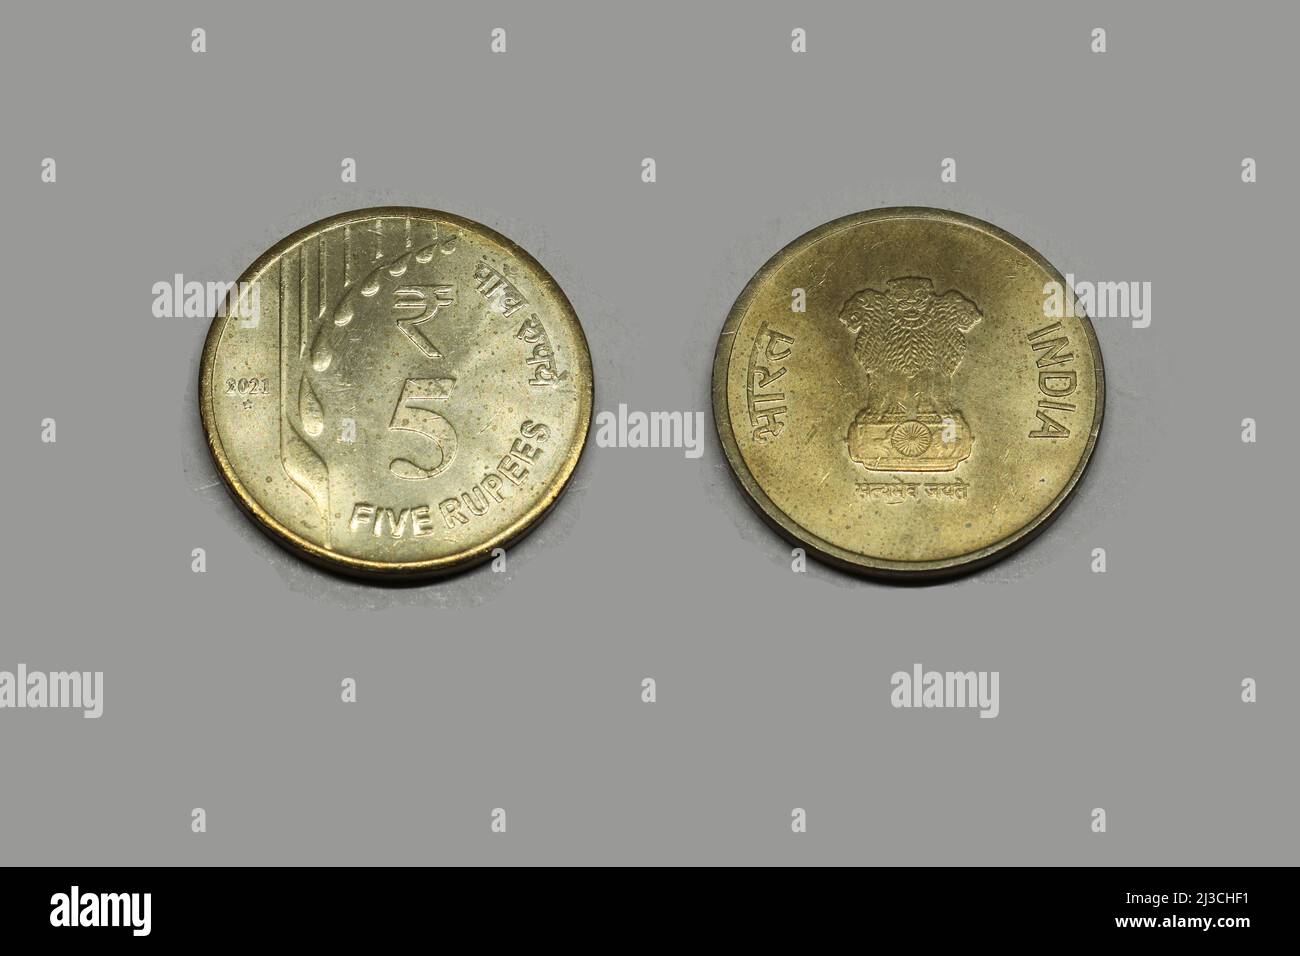 five rupees coin indian currency money old five rupees coin with white background 2J3CHF1